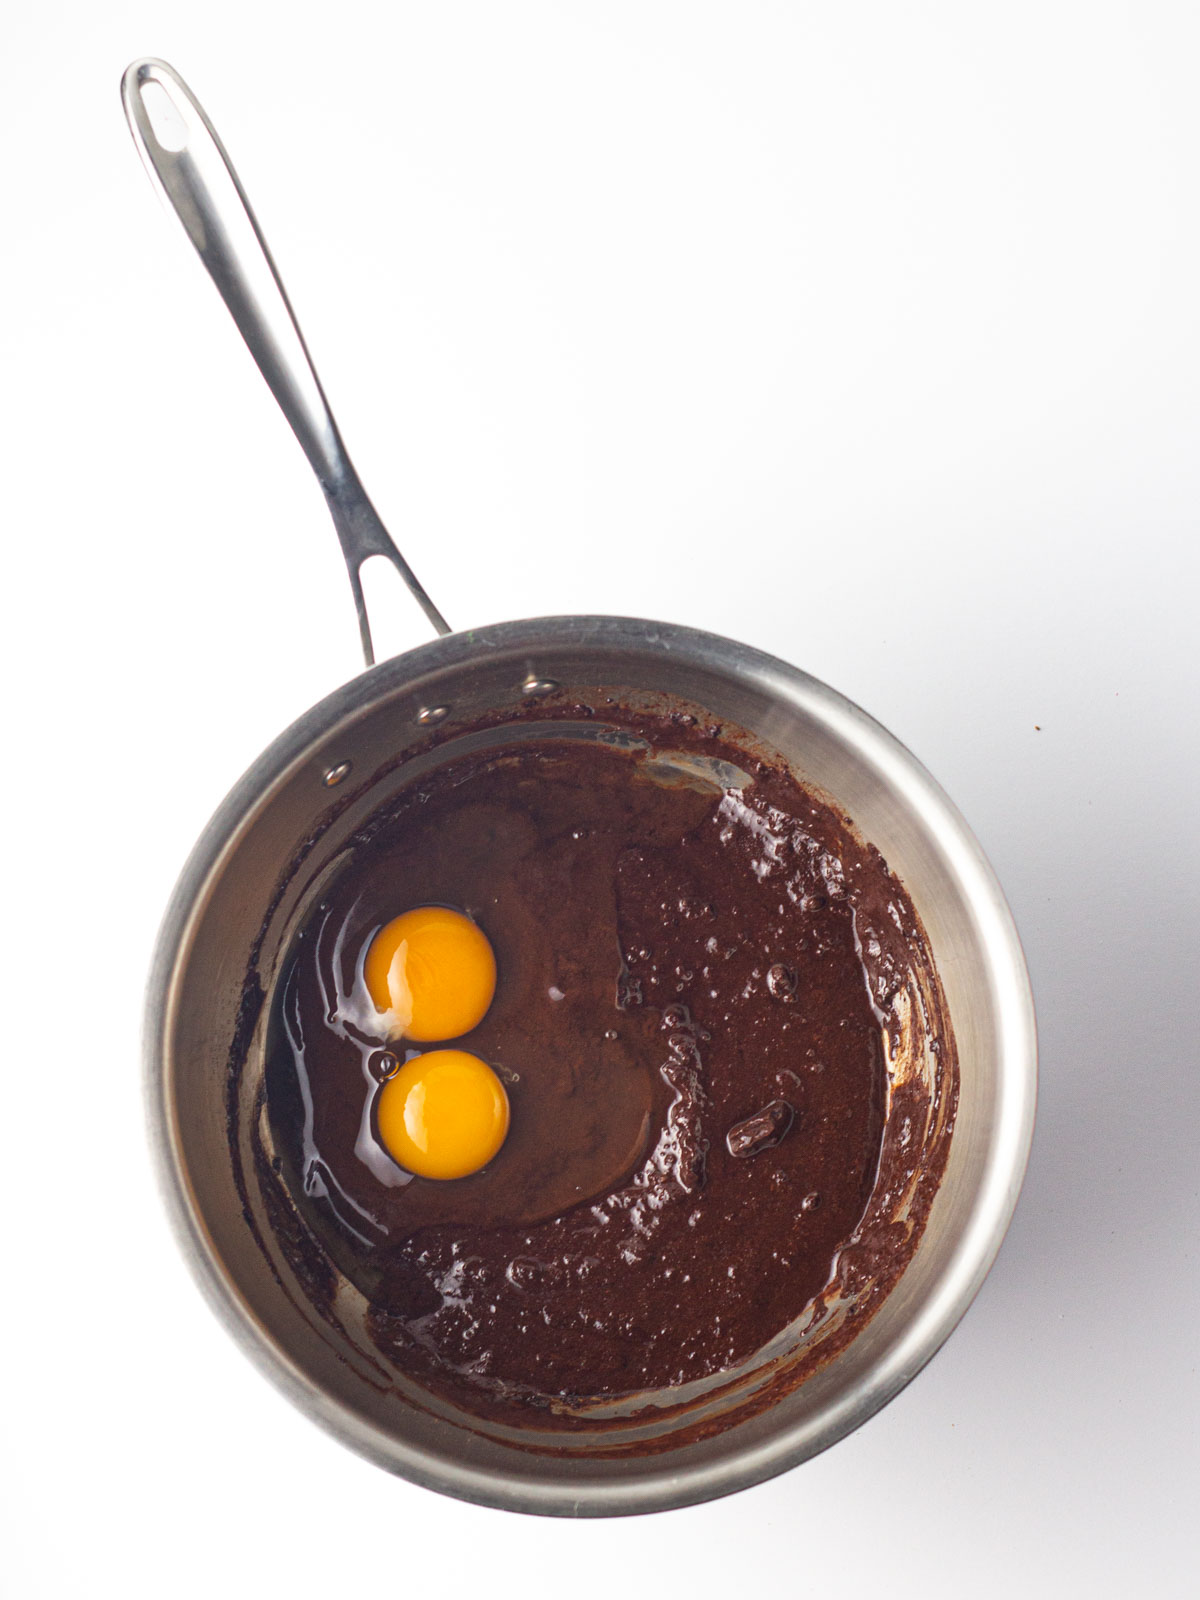 Eggs added to the peppermint mocha brownie batter in a medium saucepan.